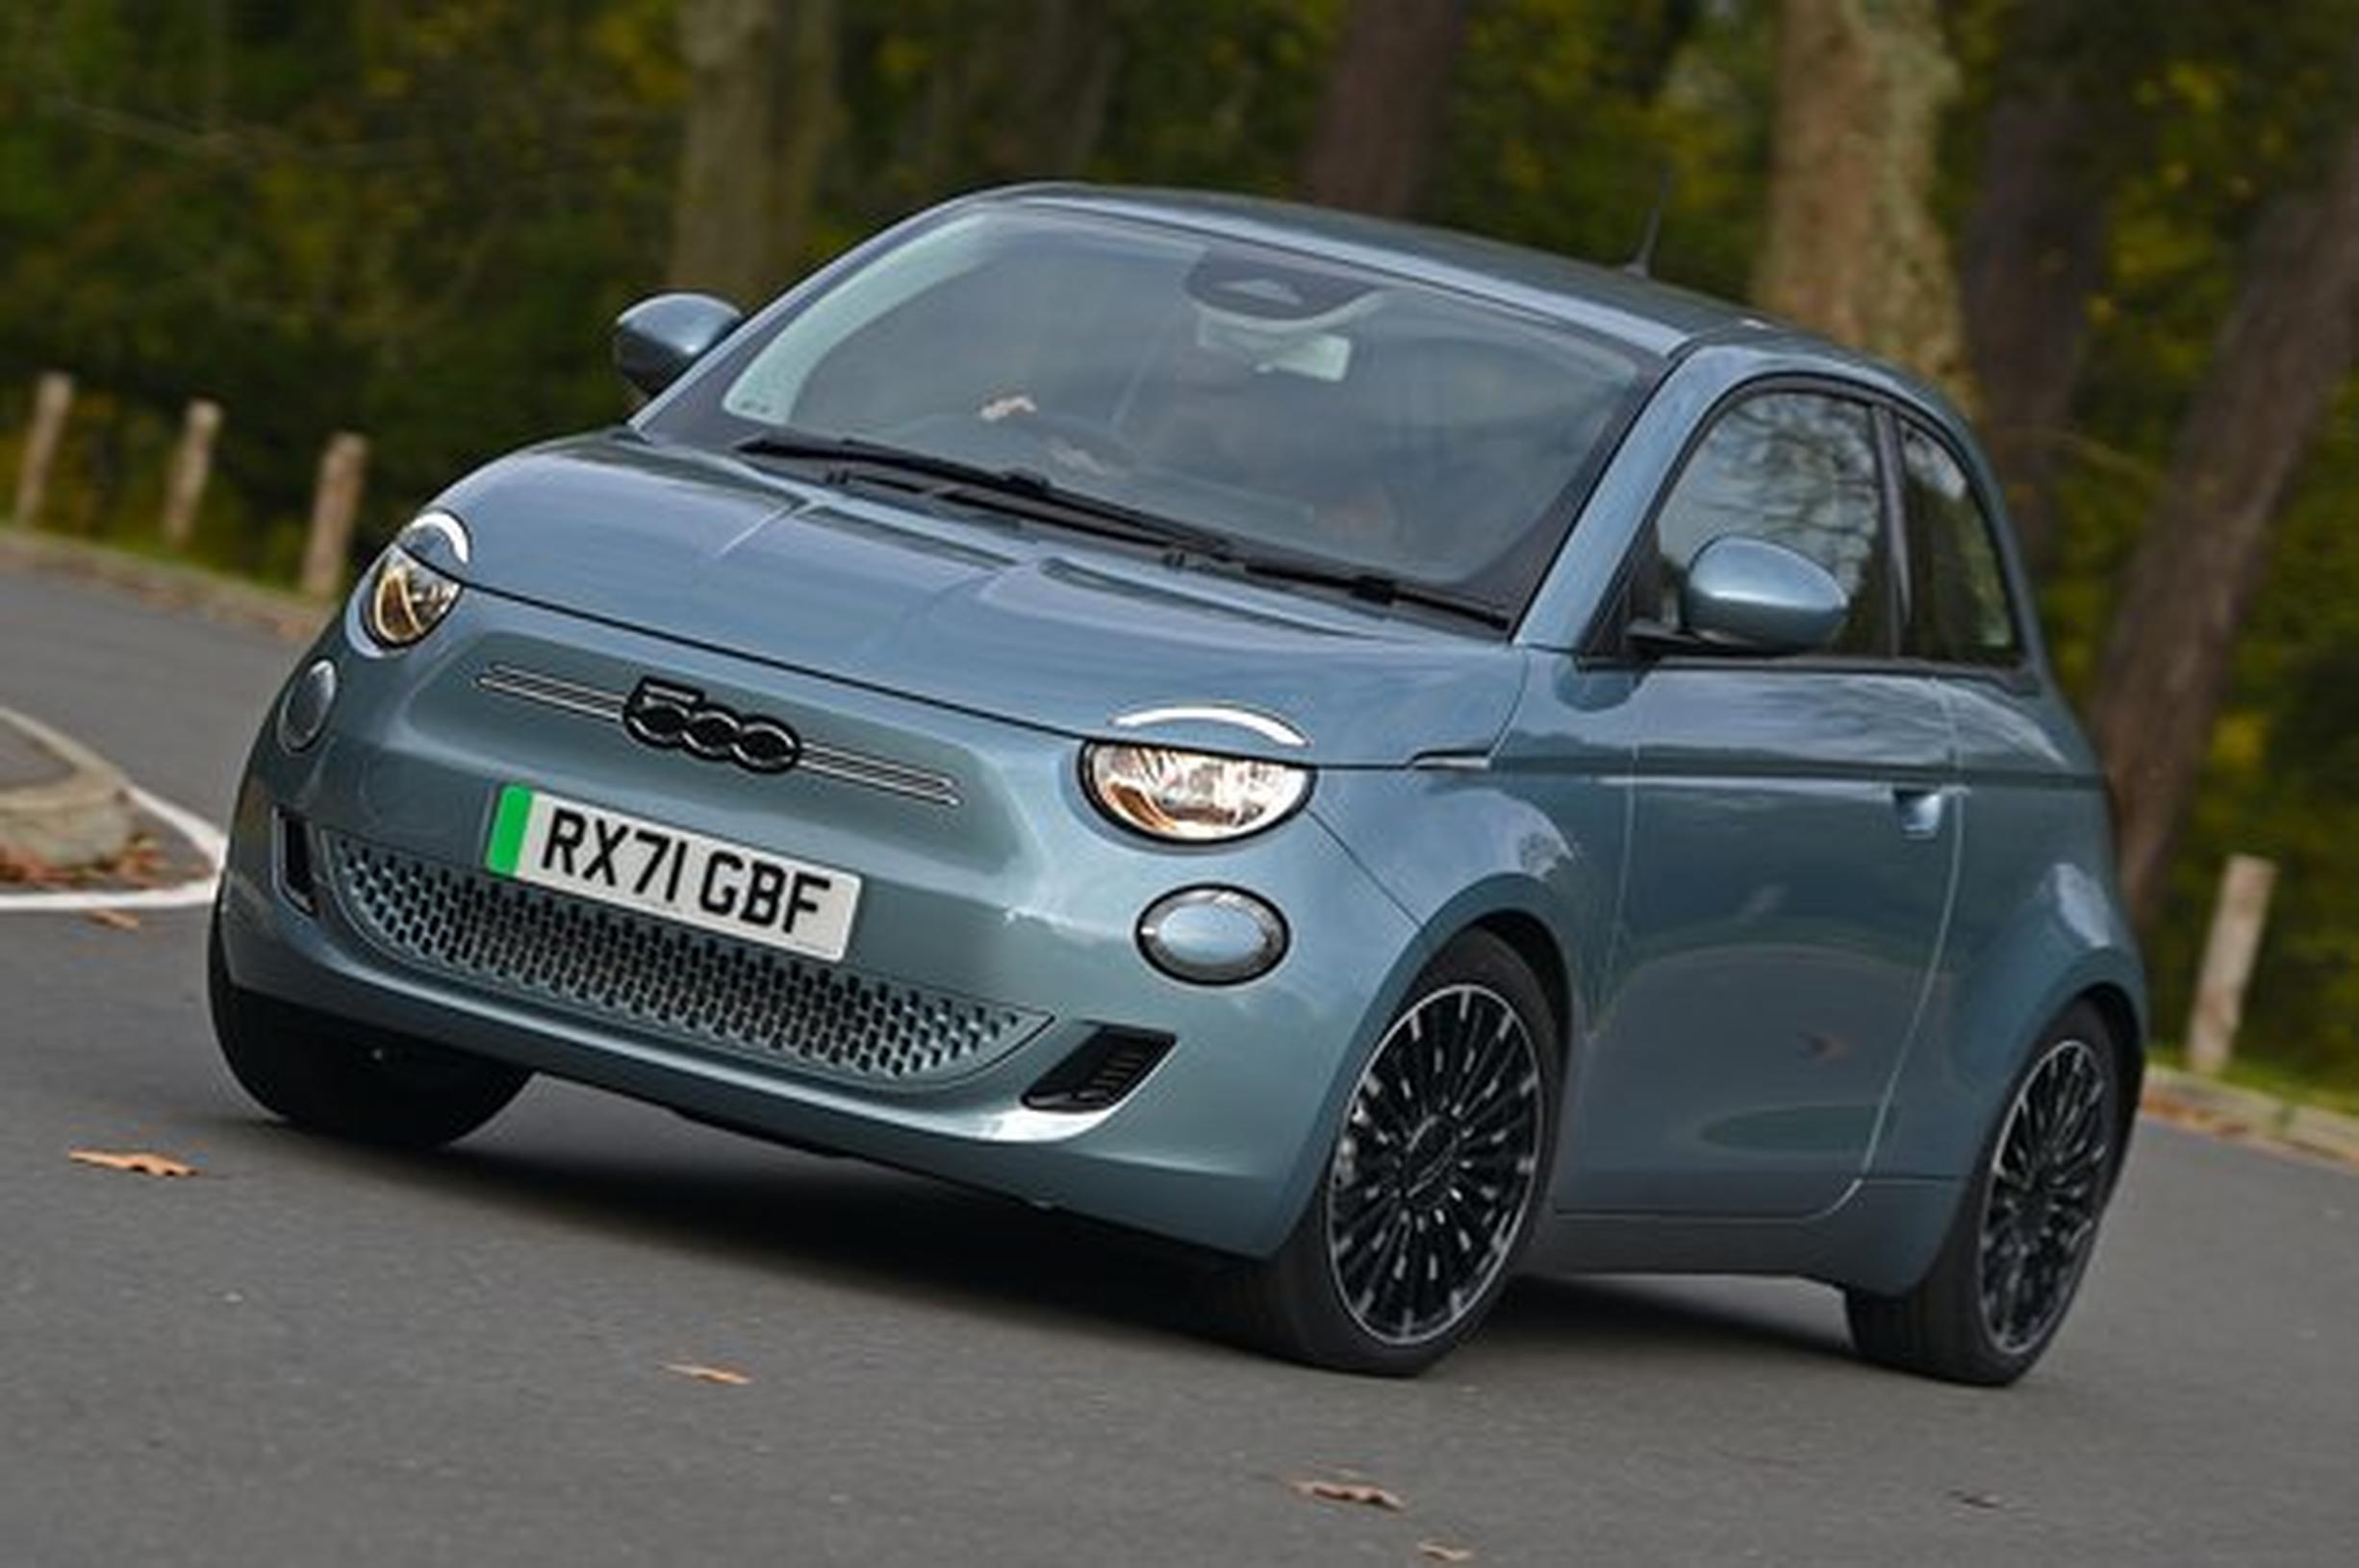 Best electric small car: Fiat 500